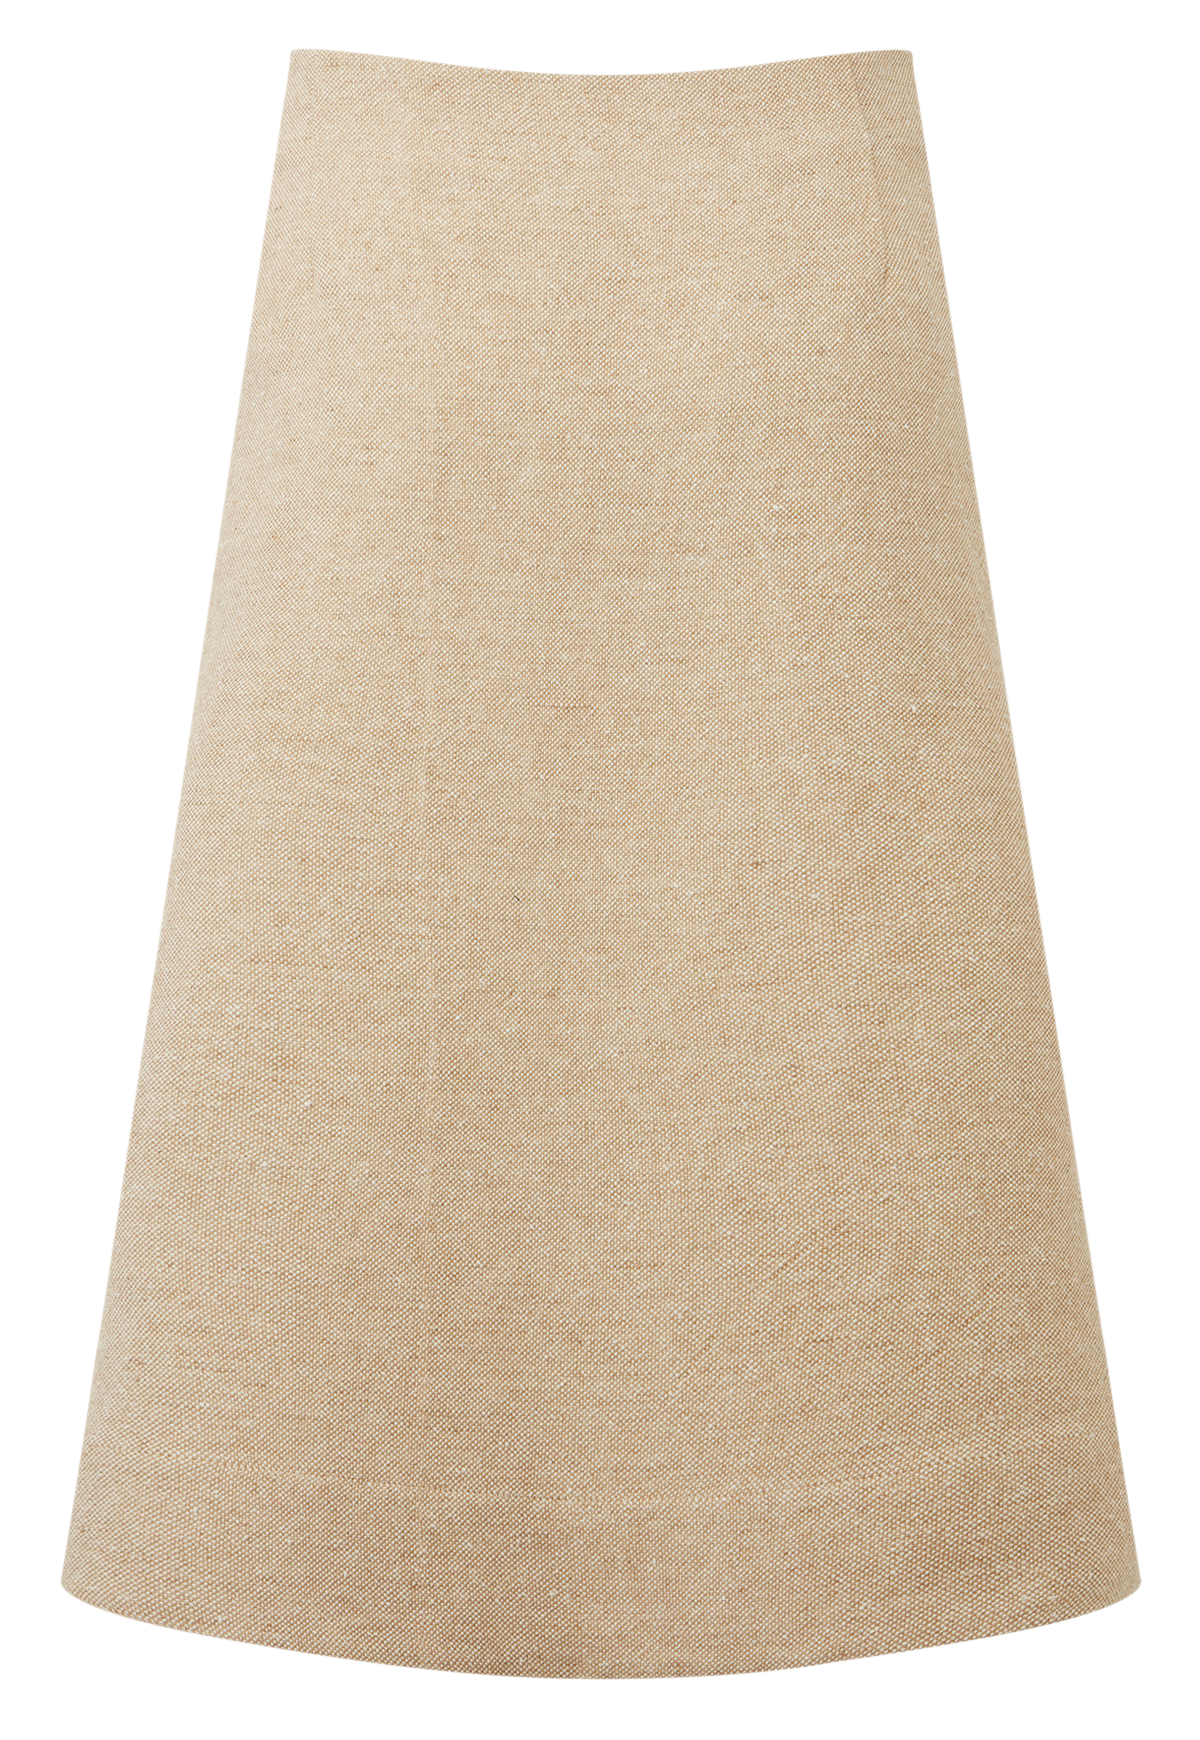 THE SCALLOP A-LINE SKIRT in NATURAL SUMMER TWEED LINEN